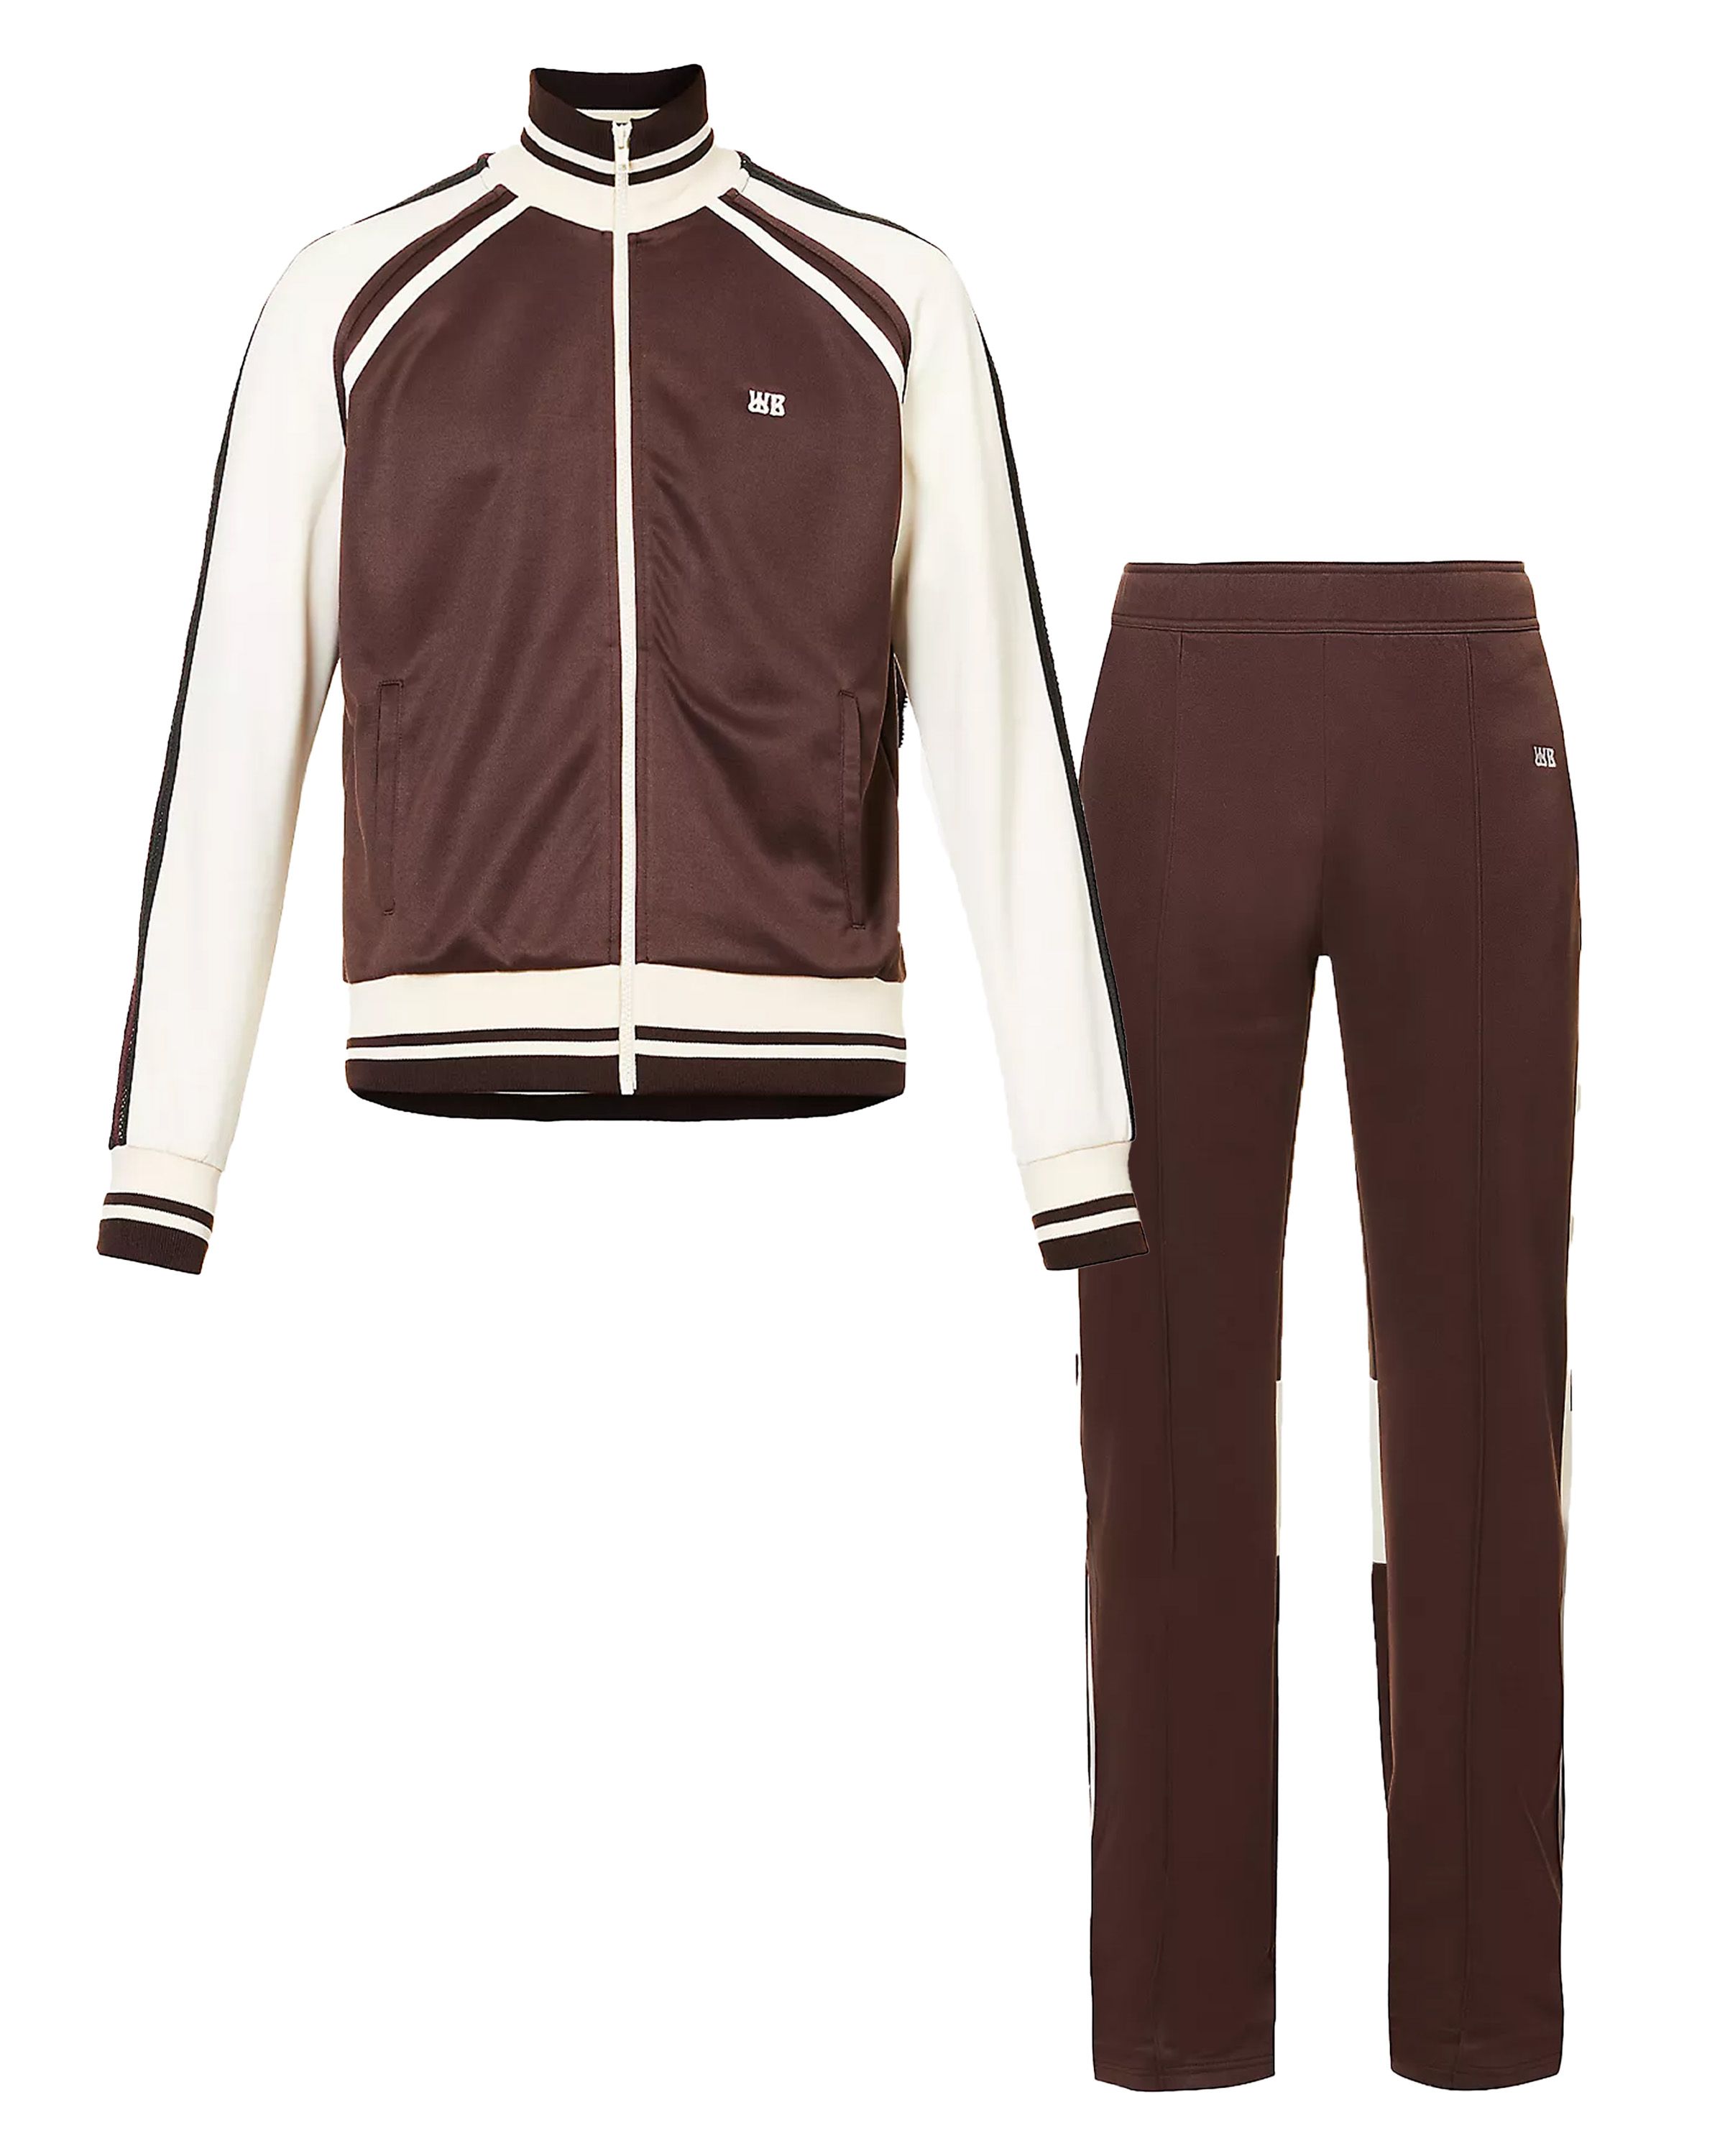 Best men's tracksuit: Choose from streetwear classics and statement sets